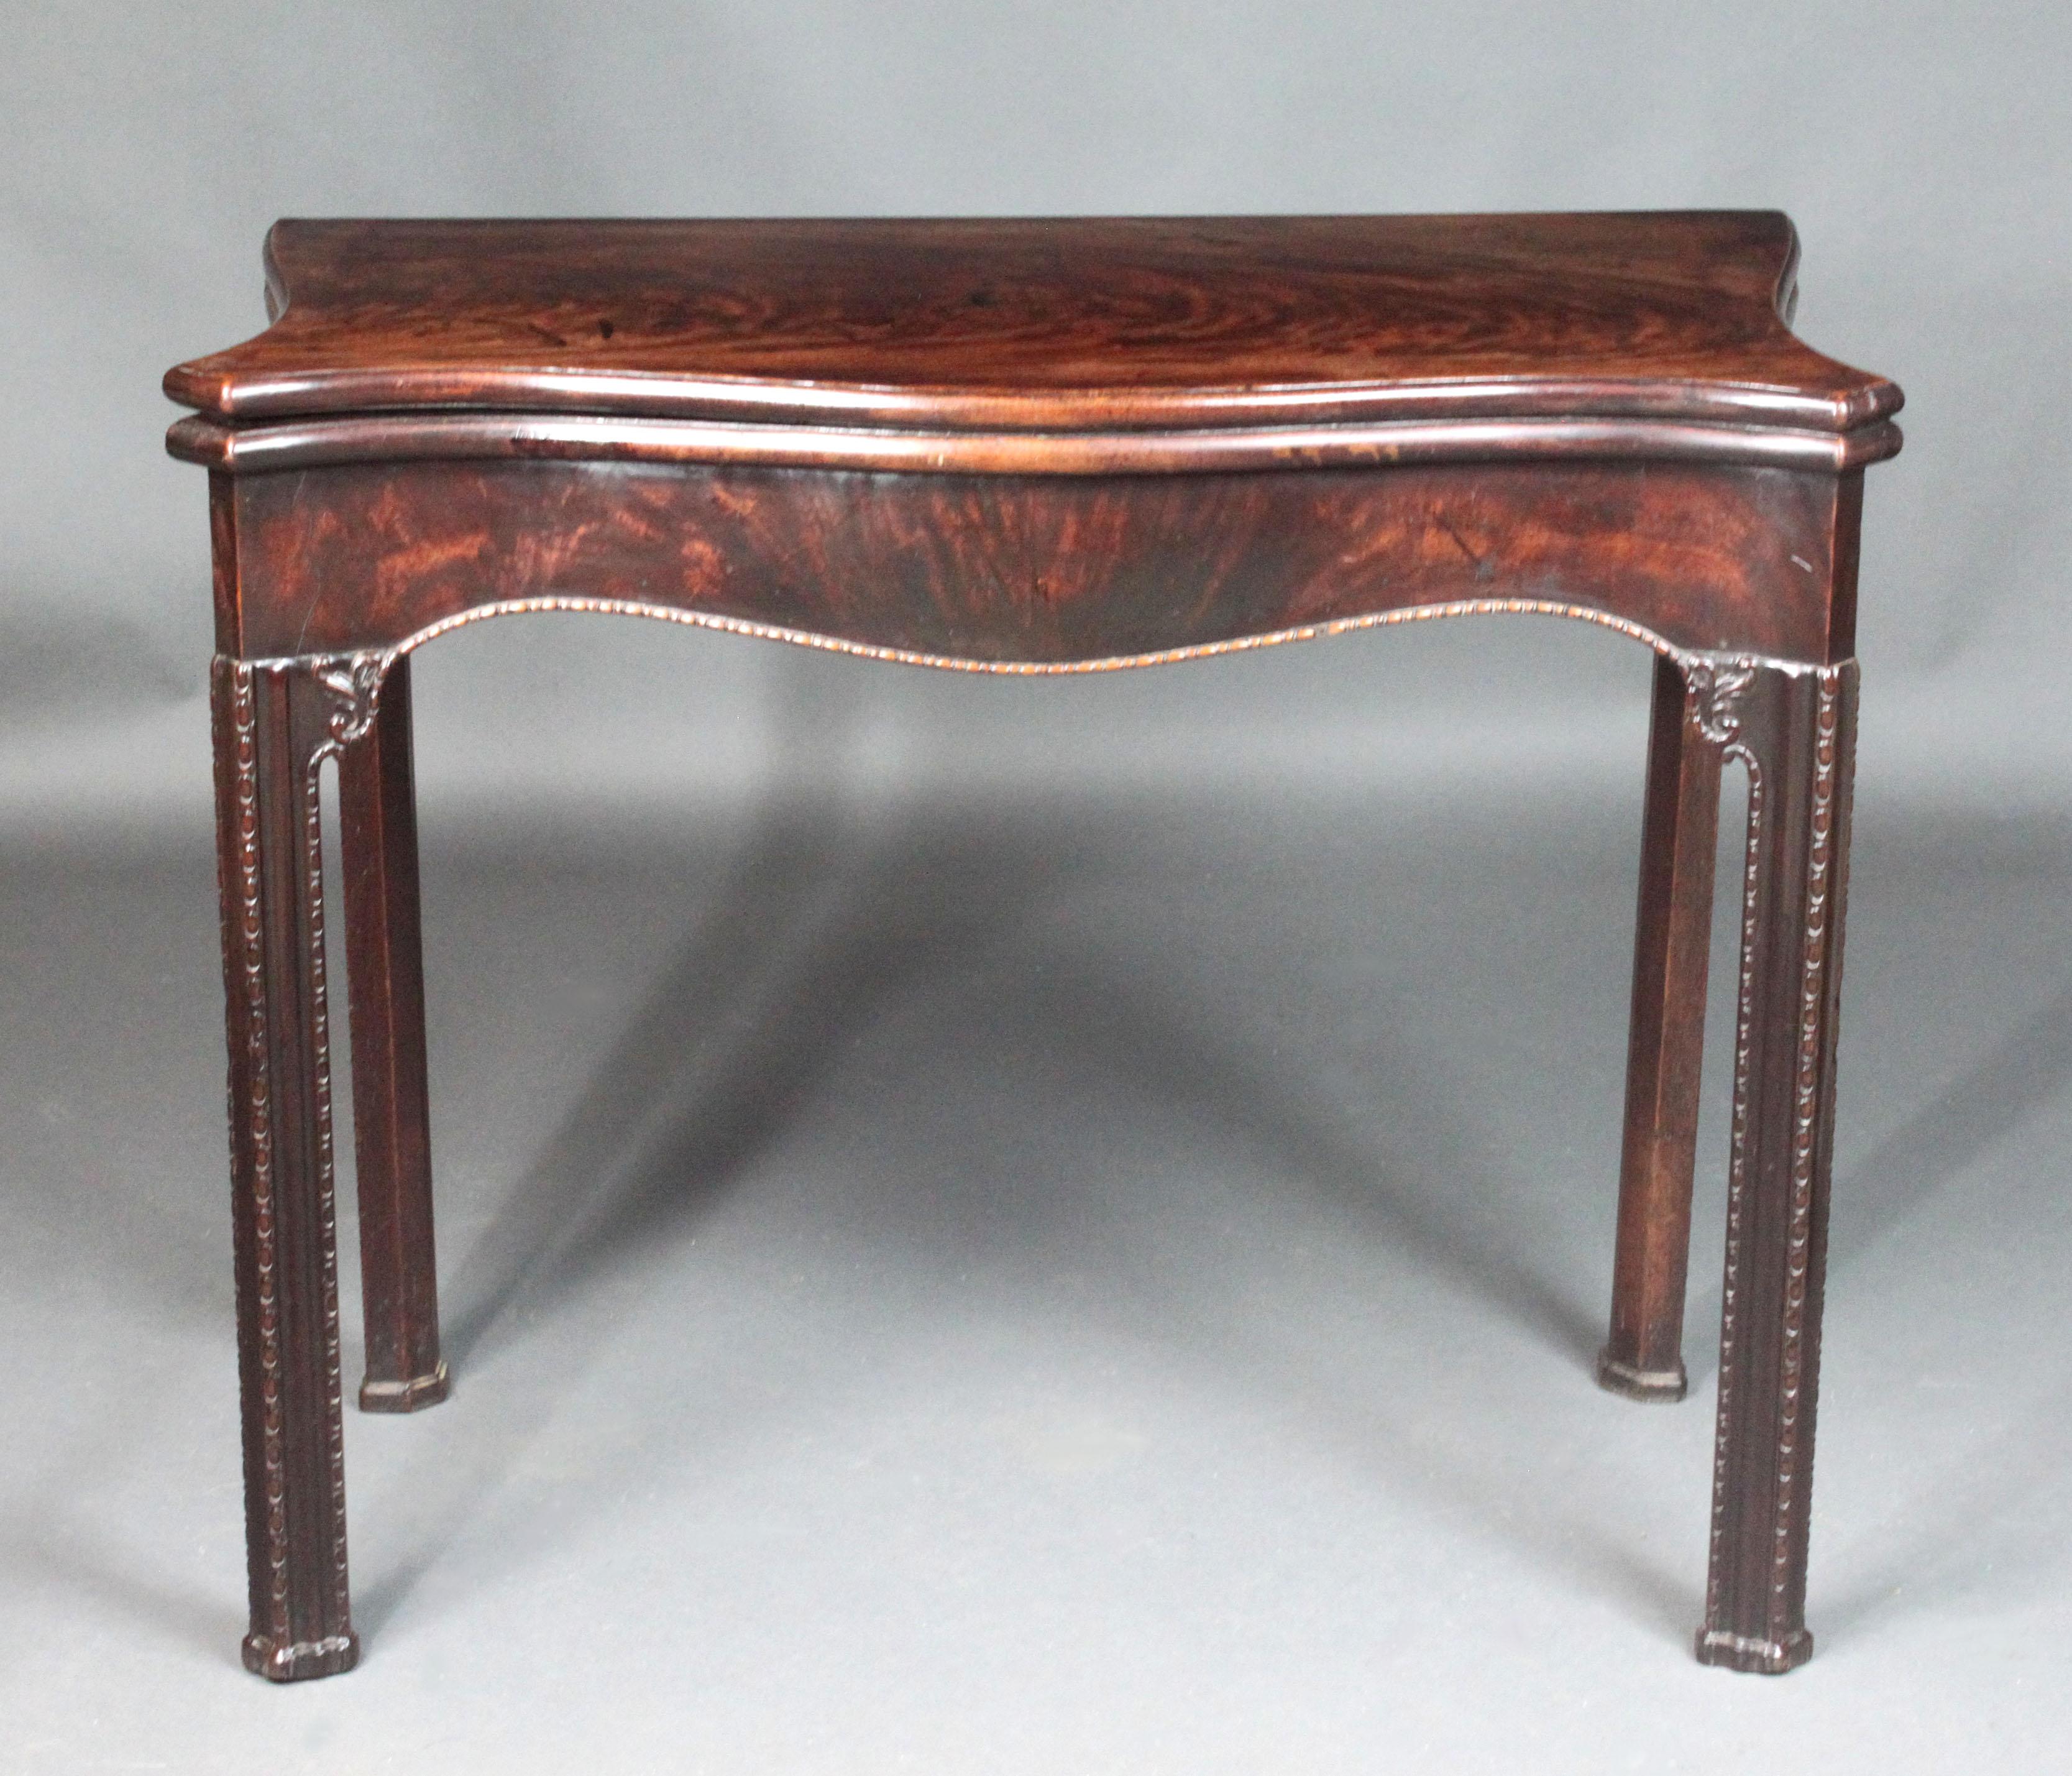 A fine George III Chippendale period serpentine-front figured mahogany card table of a good colour and patina; attractive model with shaped sides and frieze, the moulded legs and frieze with extensive egg and dart carving and corner brackets with